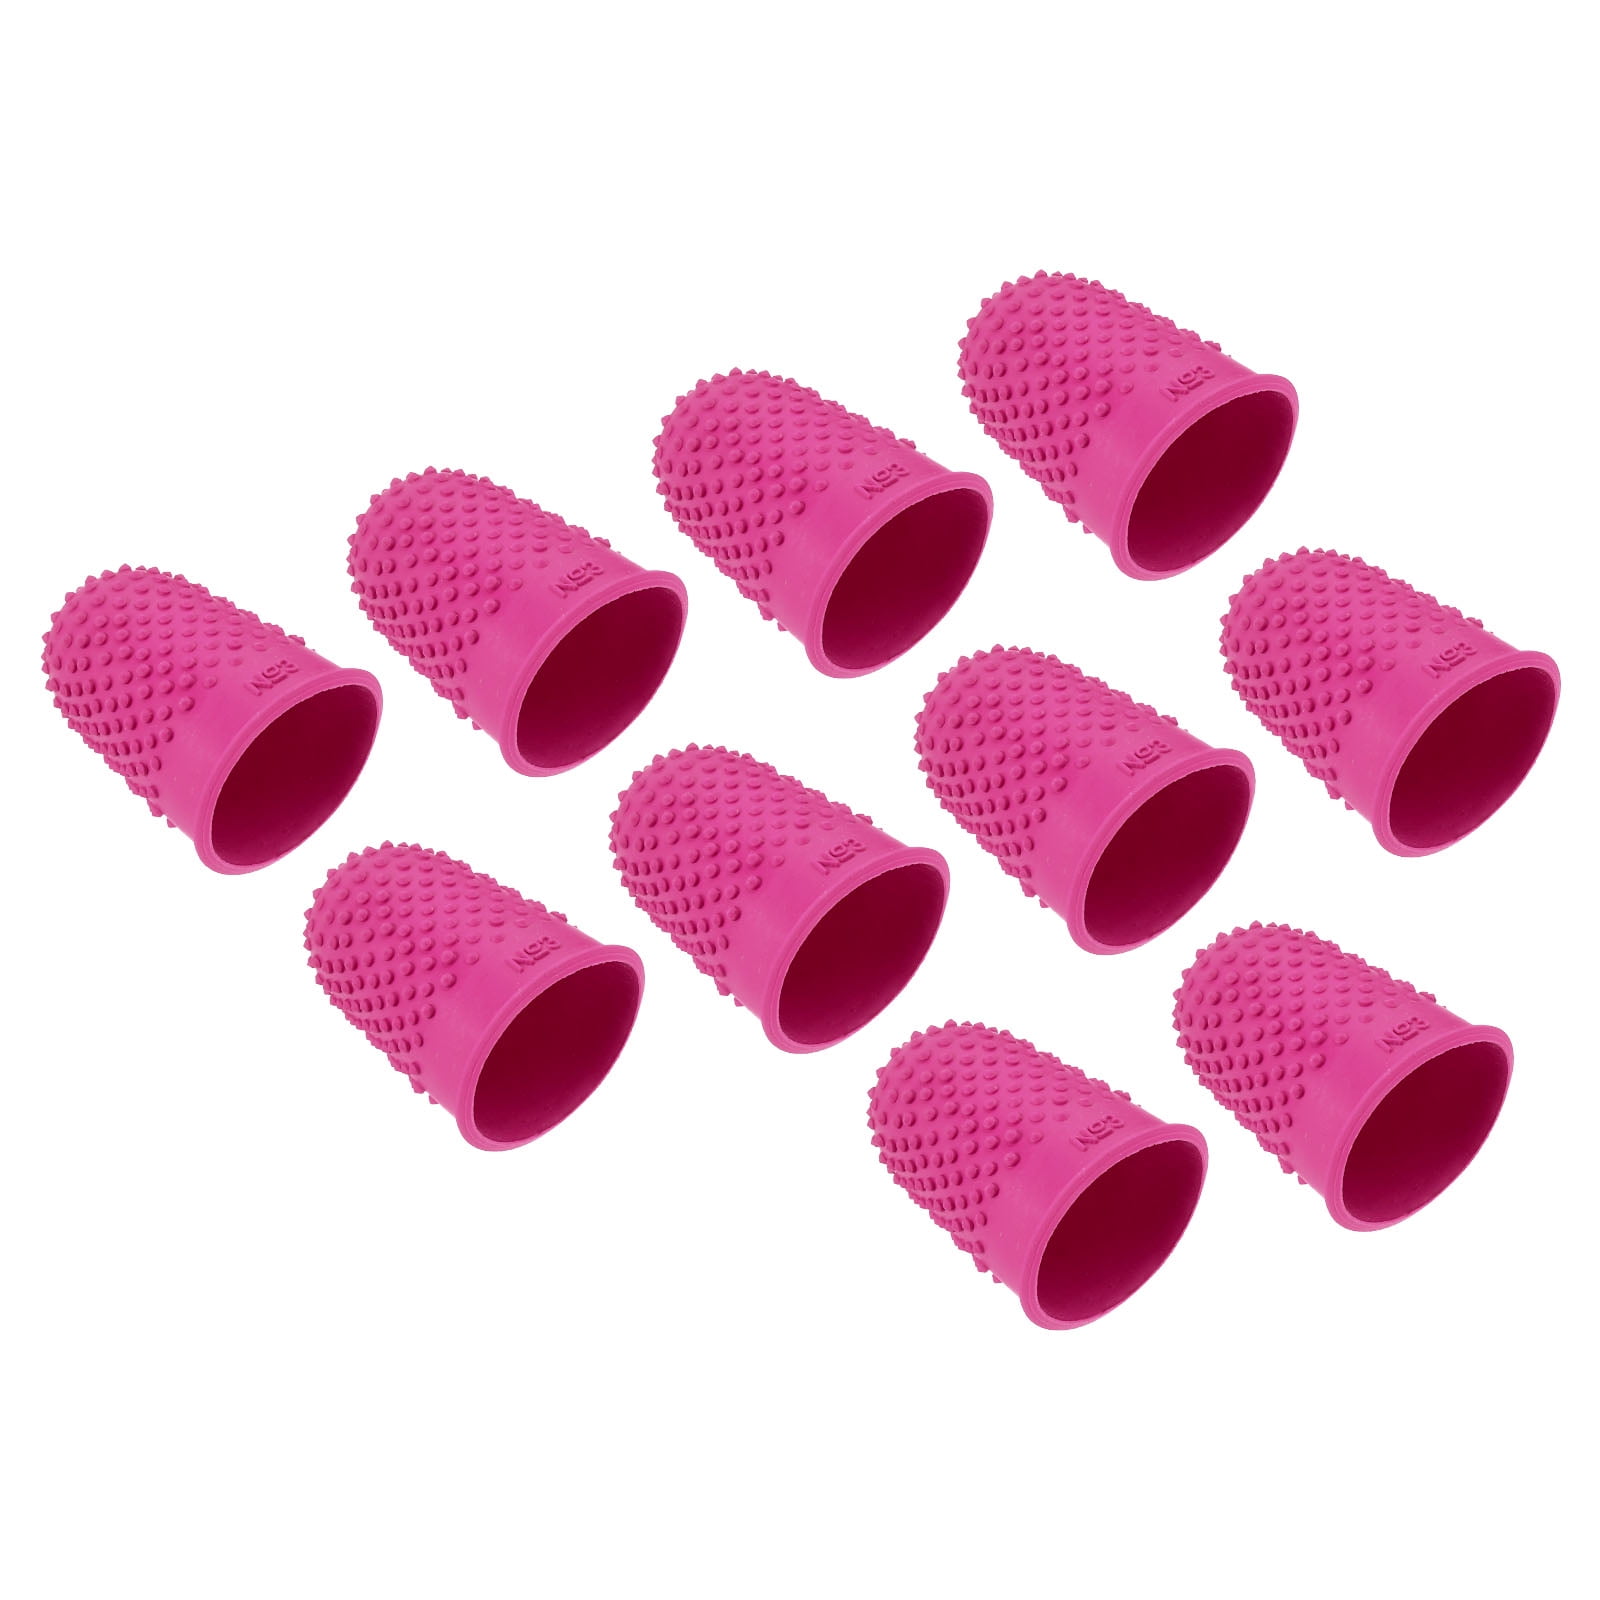 Uxcell Finger Tips Anti Slip Fingertip Protector, 20 Pack Silicone Finger Guard, Pink